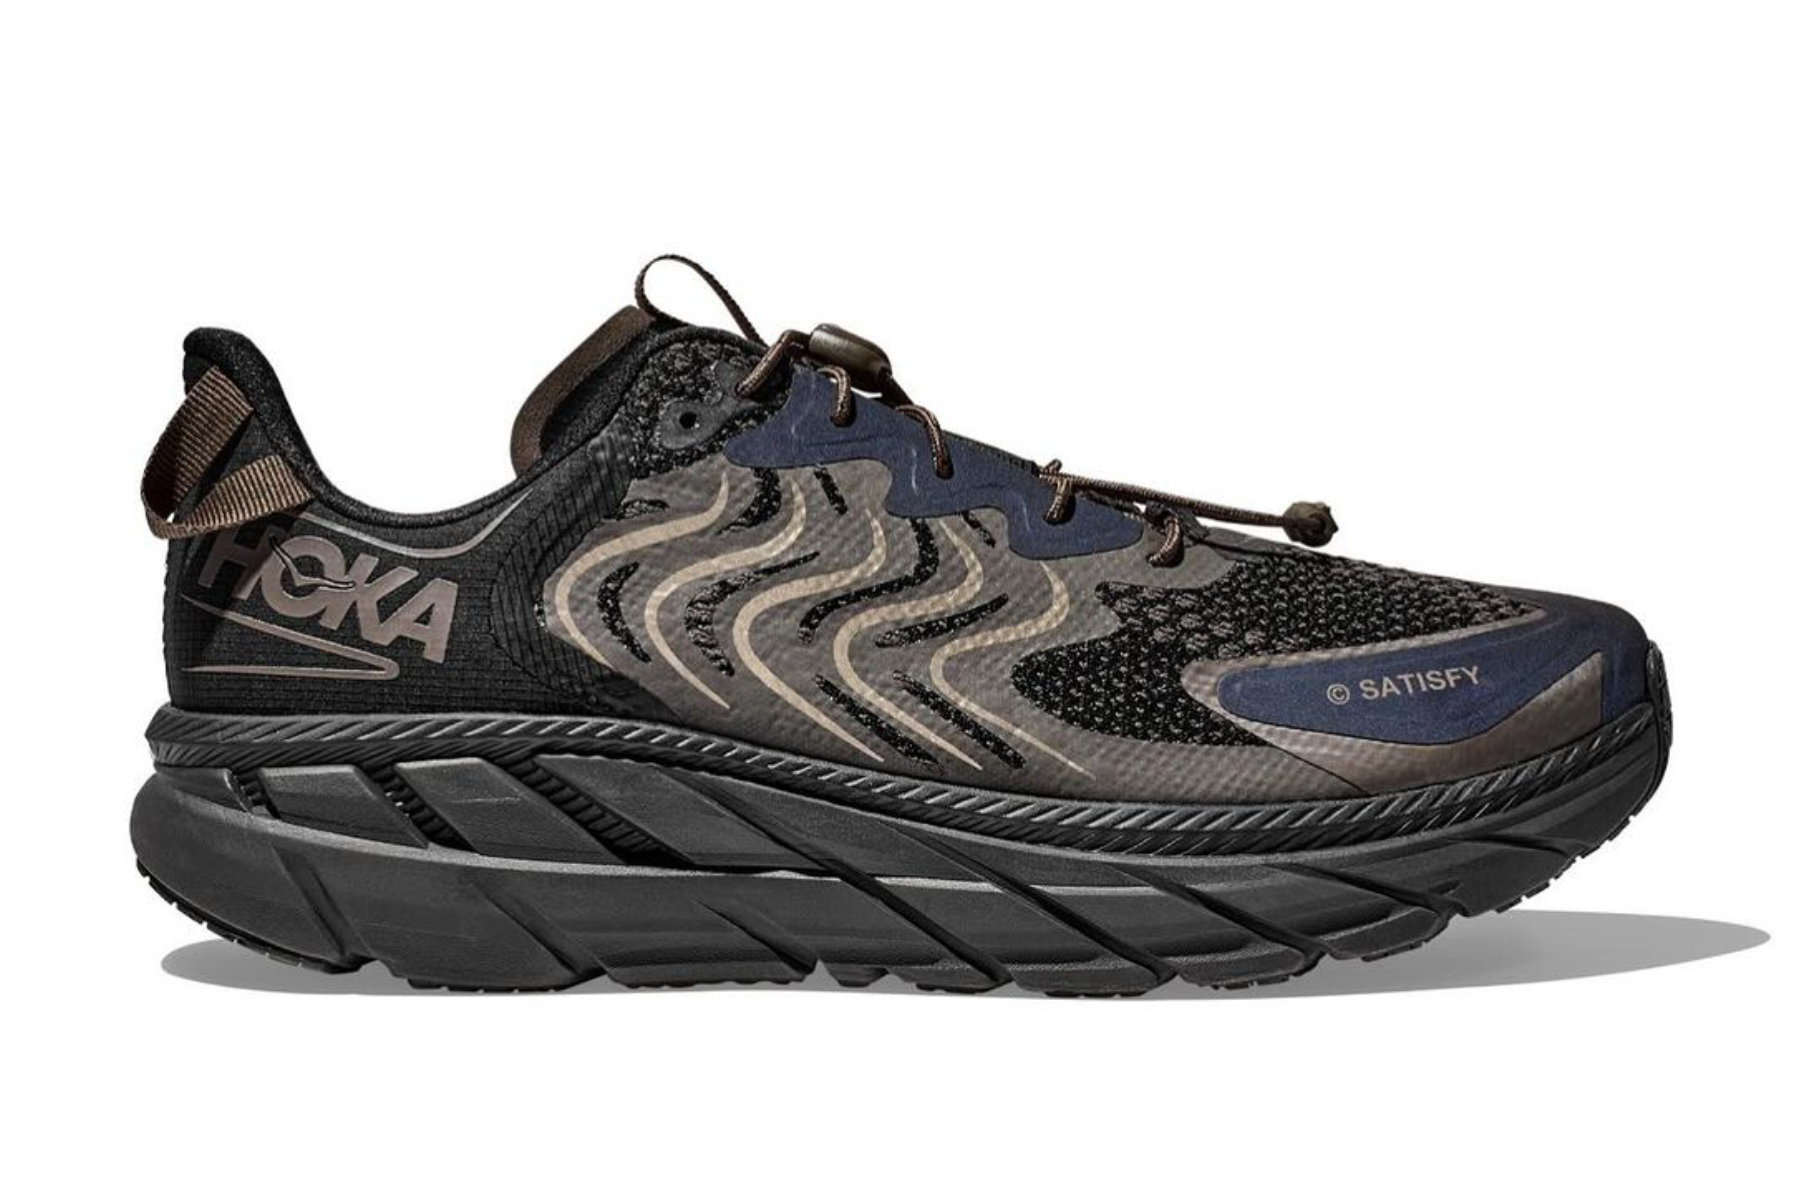 HOKA & Satisfy are teaming up for a collaborative take on the Clifton LS.